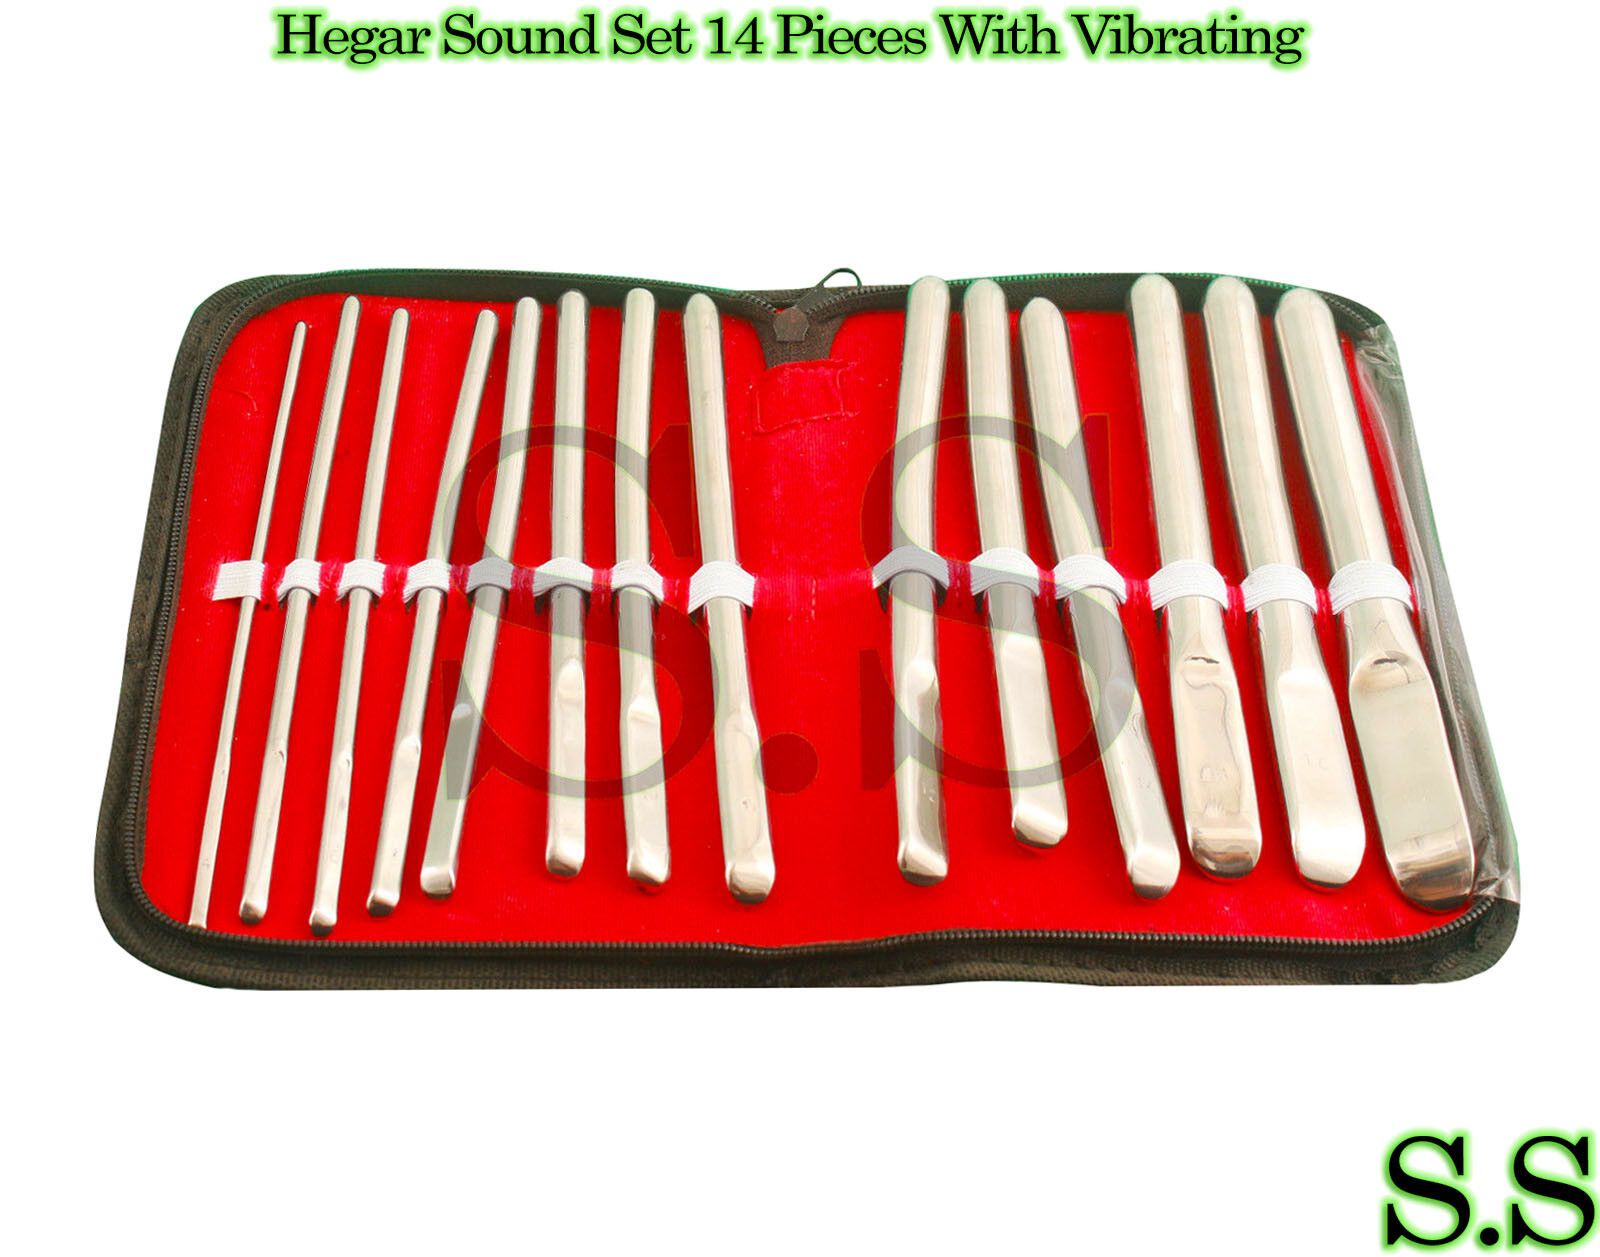 FLAT ENDED URETHRAL SOUNDS 14 PIECE KIT / ROD DILATOR S.S Does Not Apply - фотография #3